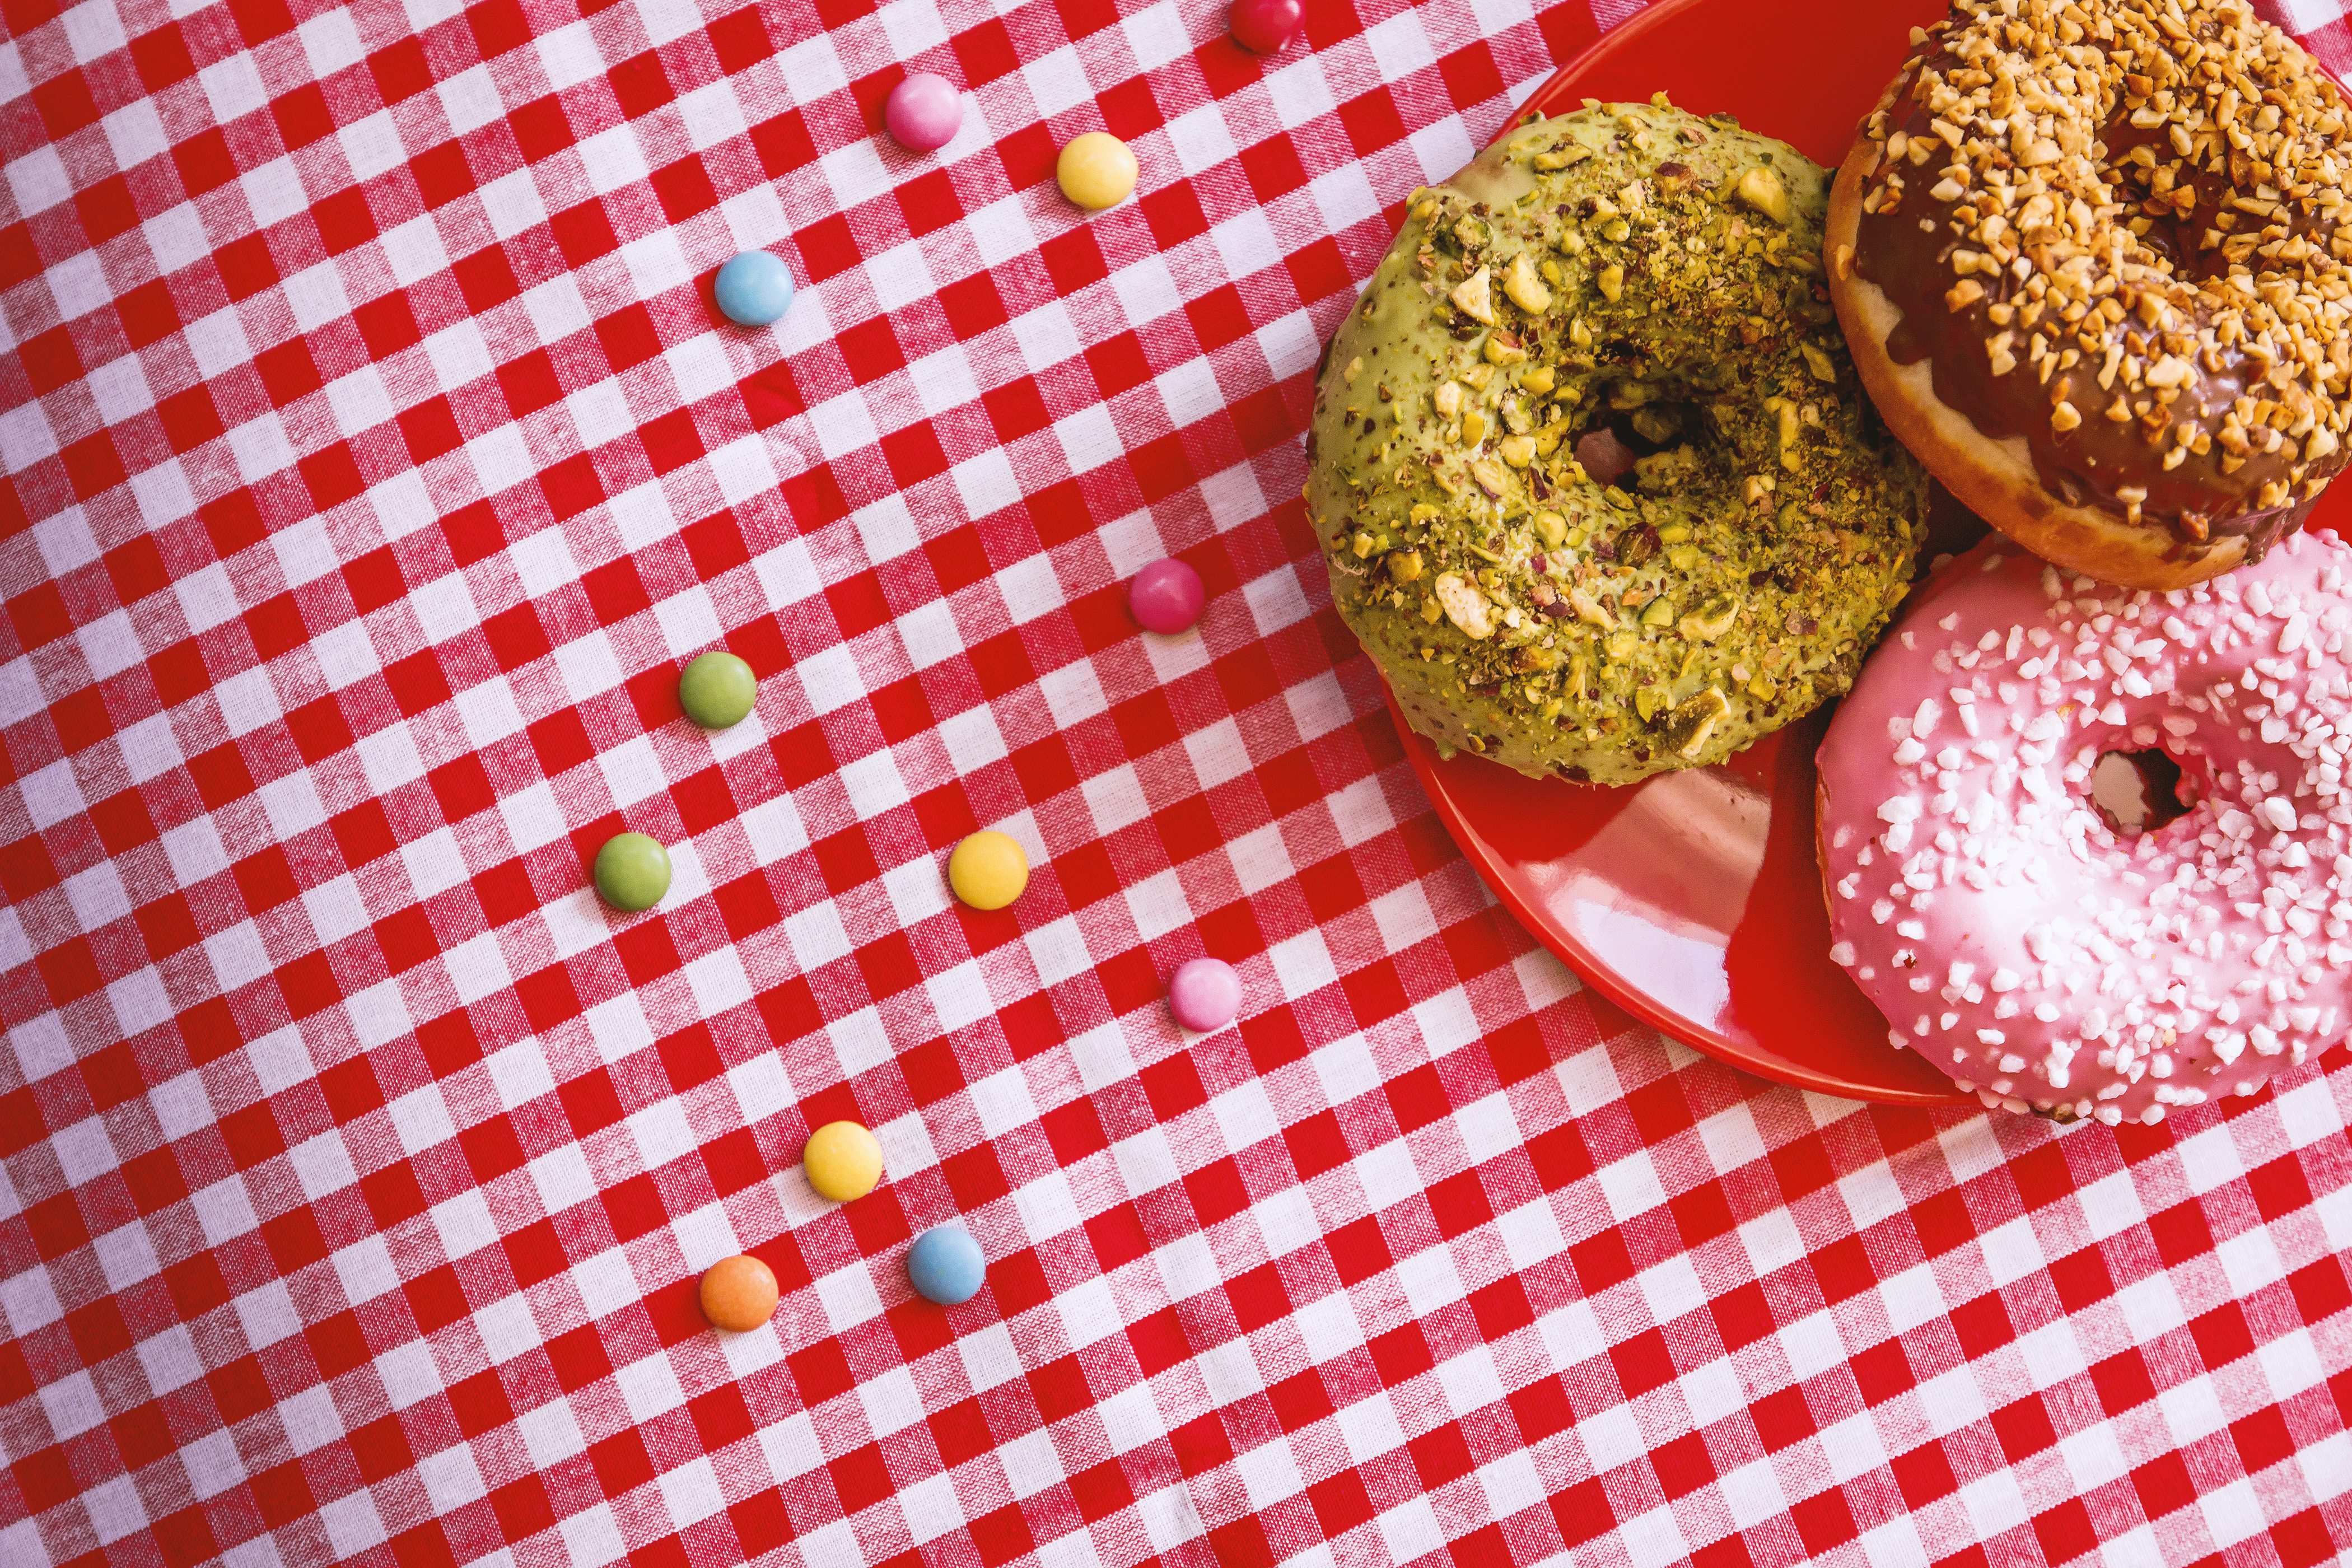 American Donuts on a plate on a nice checkered tablecloth